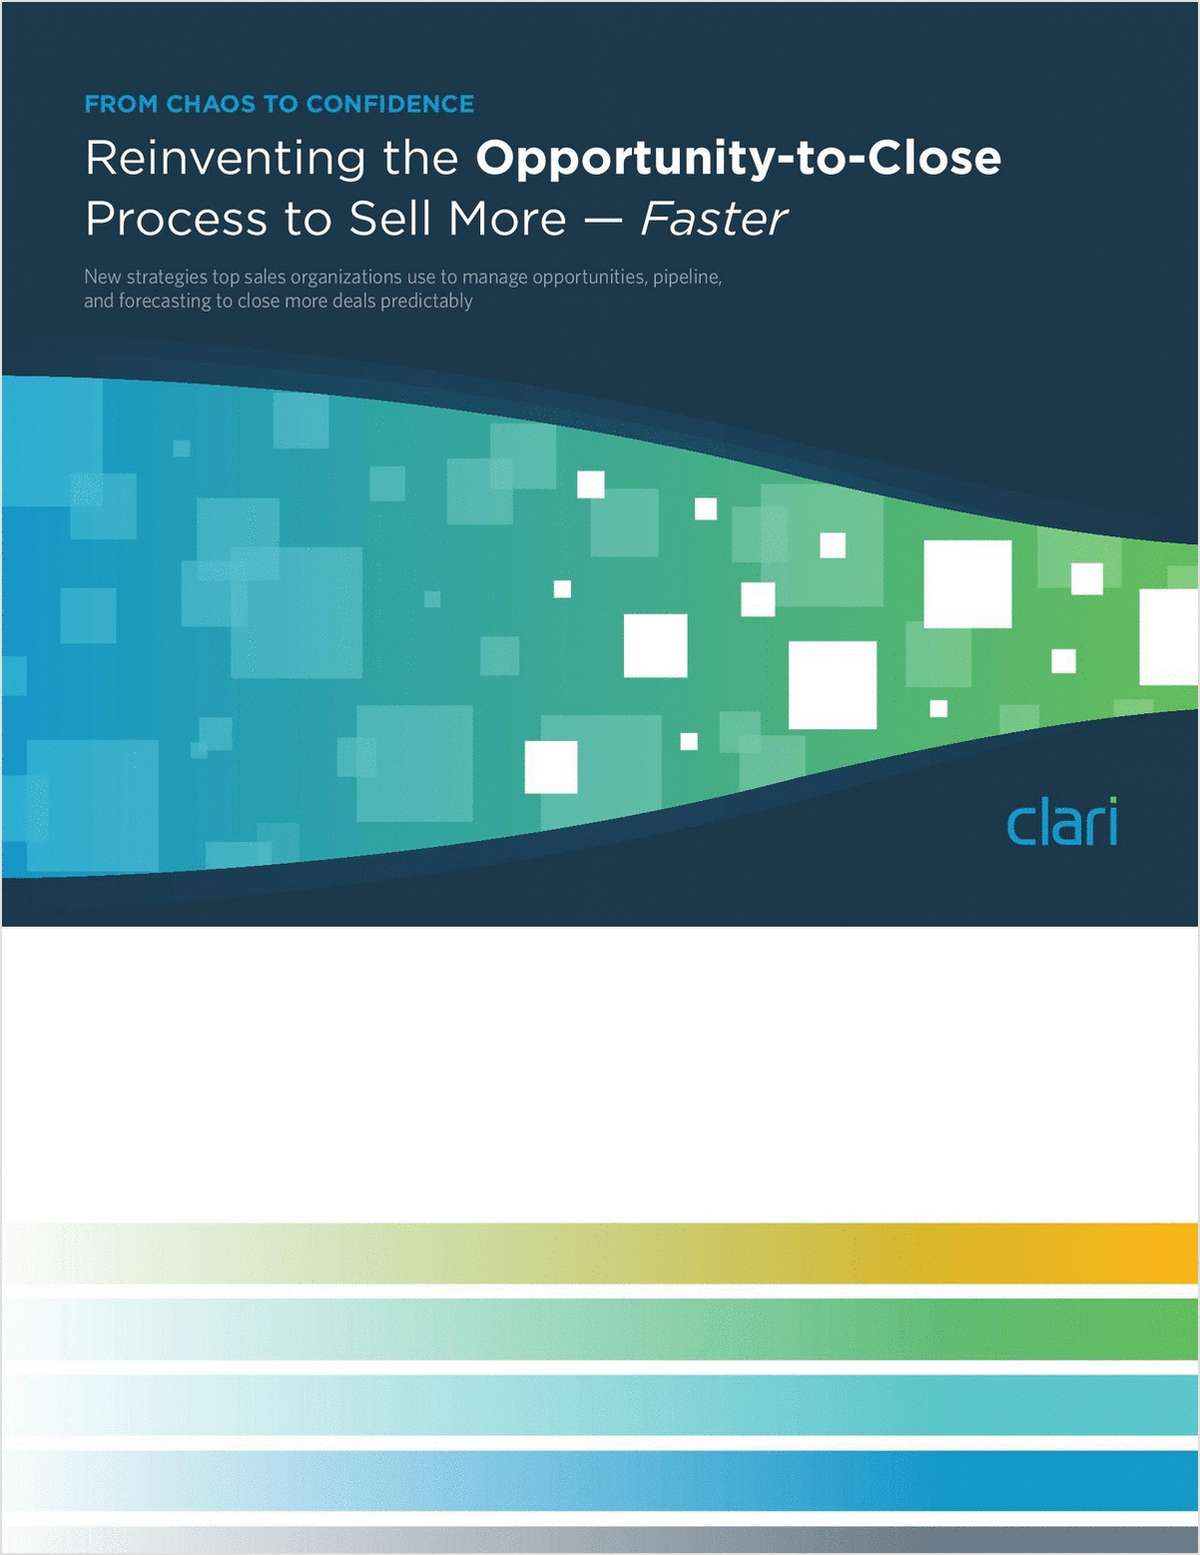 Reinventing the Opportunity-to-Close Process to Sell More-Faster